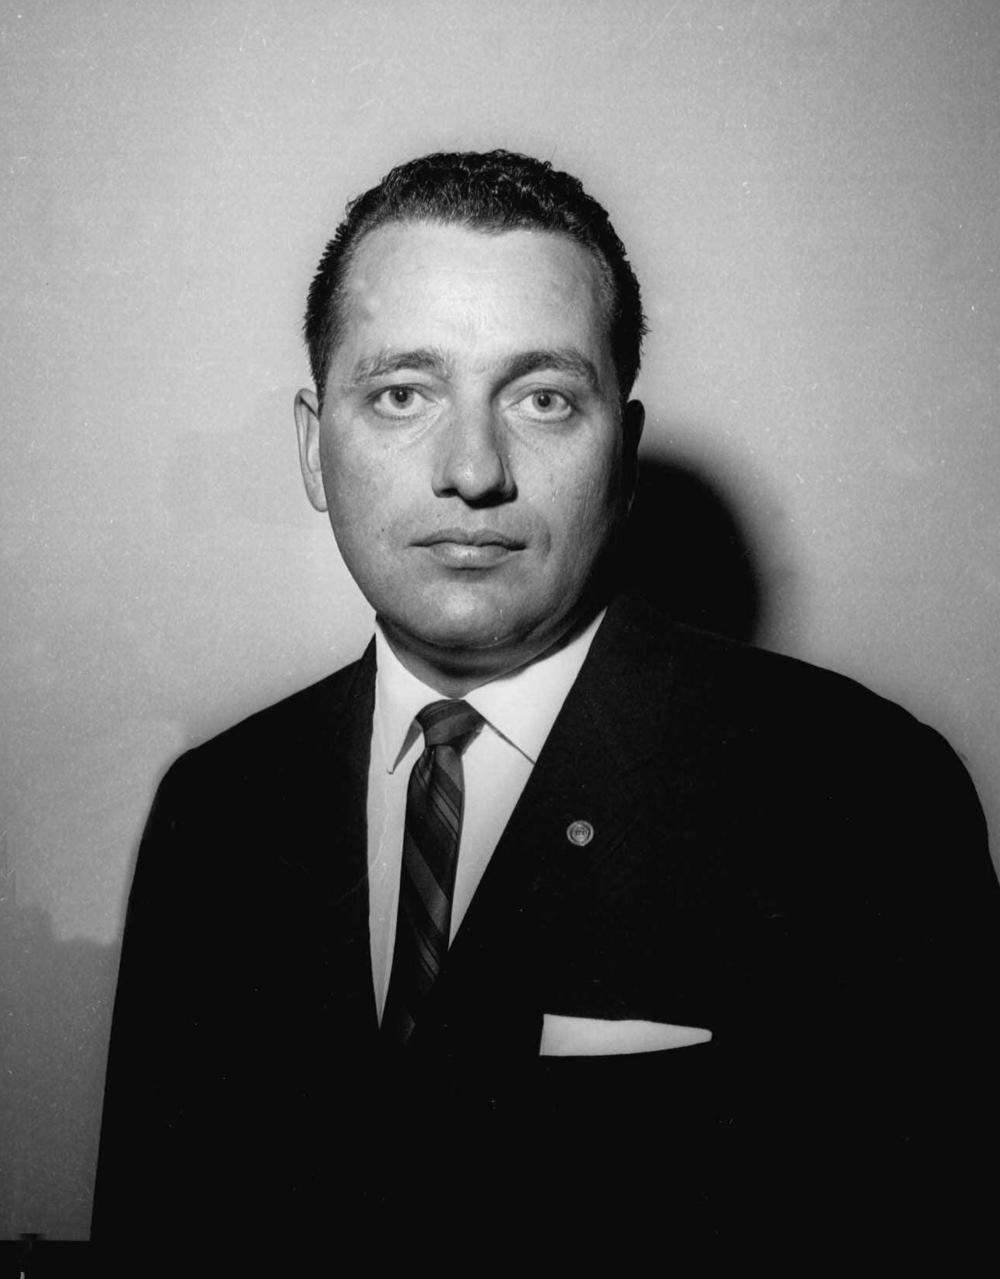 Hill poses for a photo on Dec. 3, 1963. On his lapel he wears a special pin that was presented to him for bravery in trying to protect the president and first lady during the assassination in Dallas.